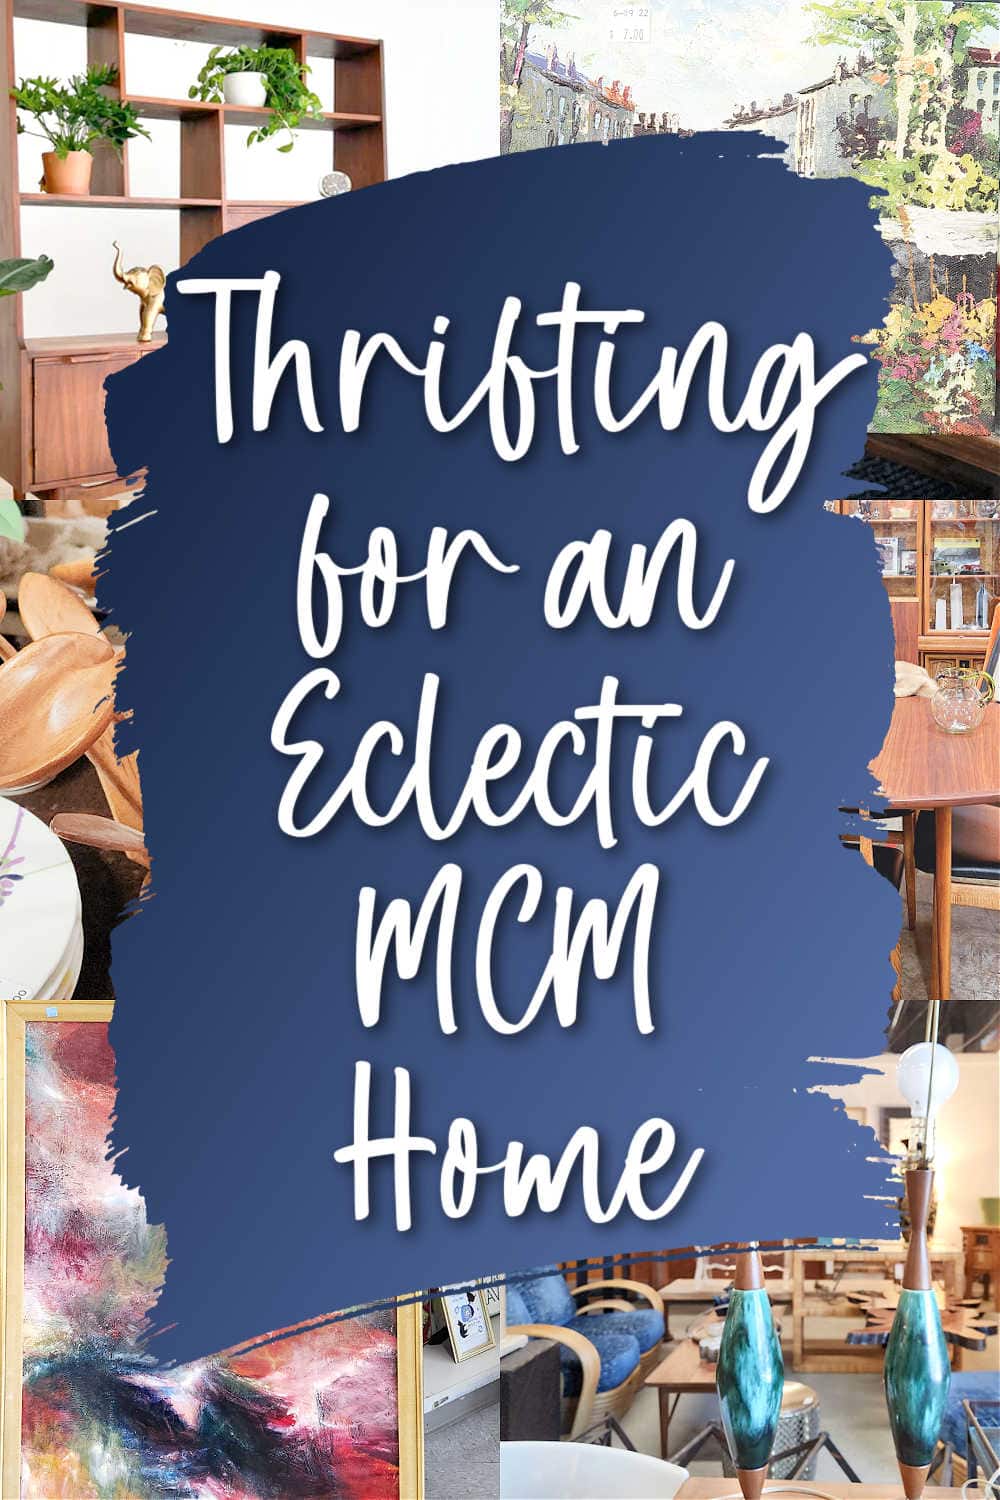 thrift shopping for eclectic and mid-century modern decor